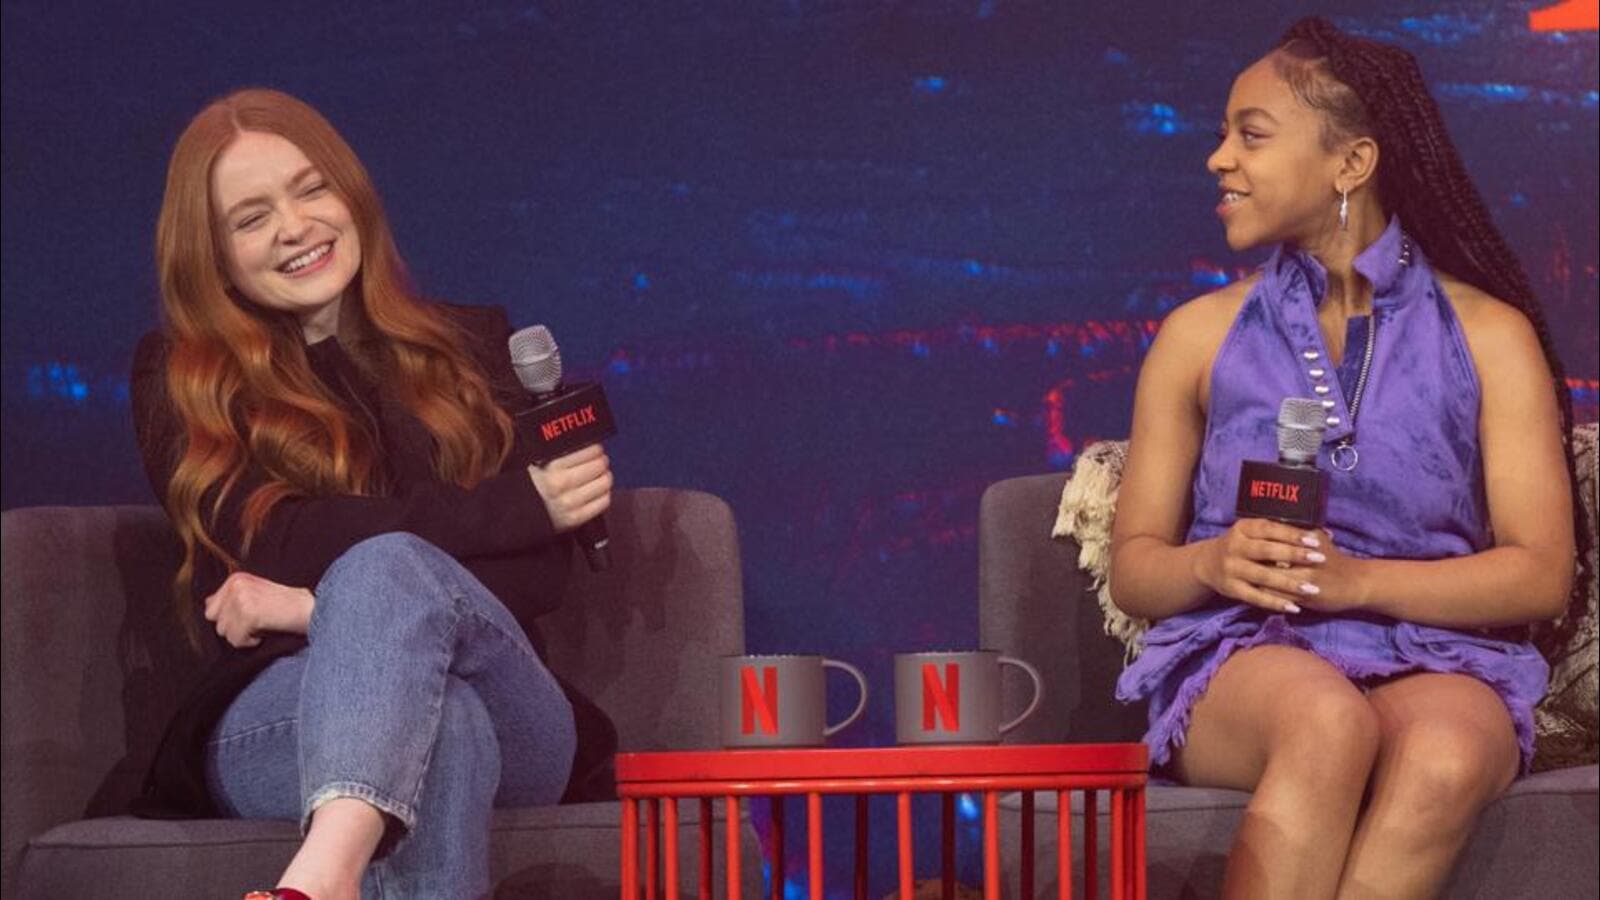 Stranger Things actors Sadie Sink and Priah Ferguson: As actors and characters, we’ve evolved so much, it’s kind of cool